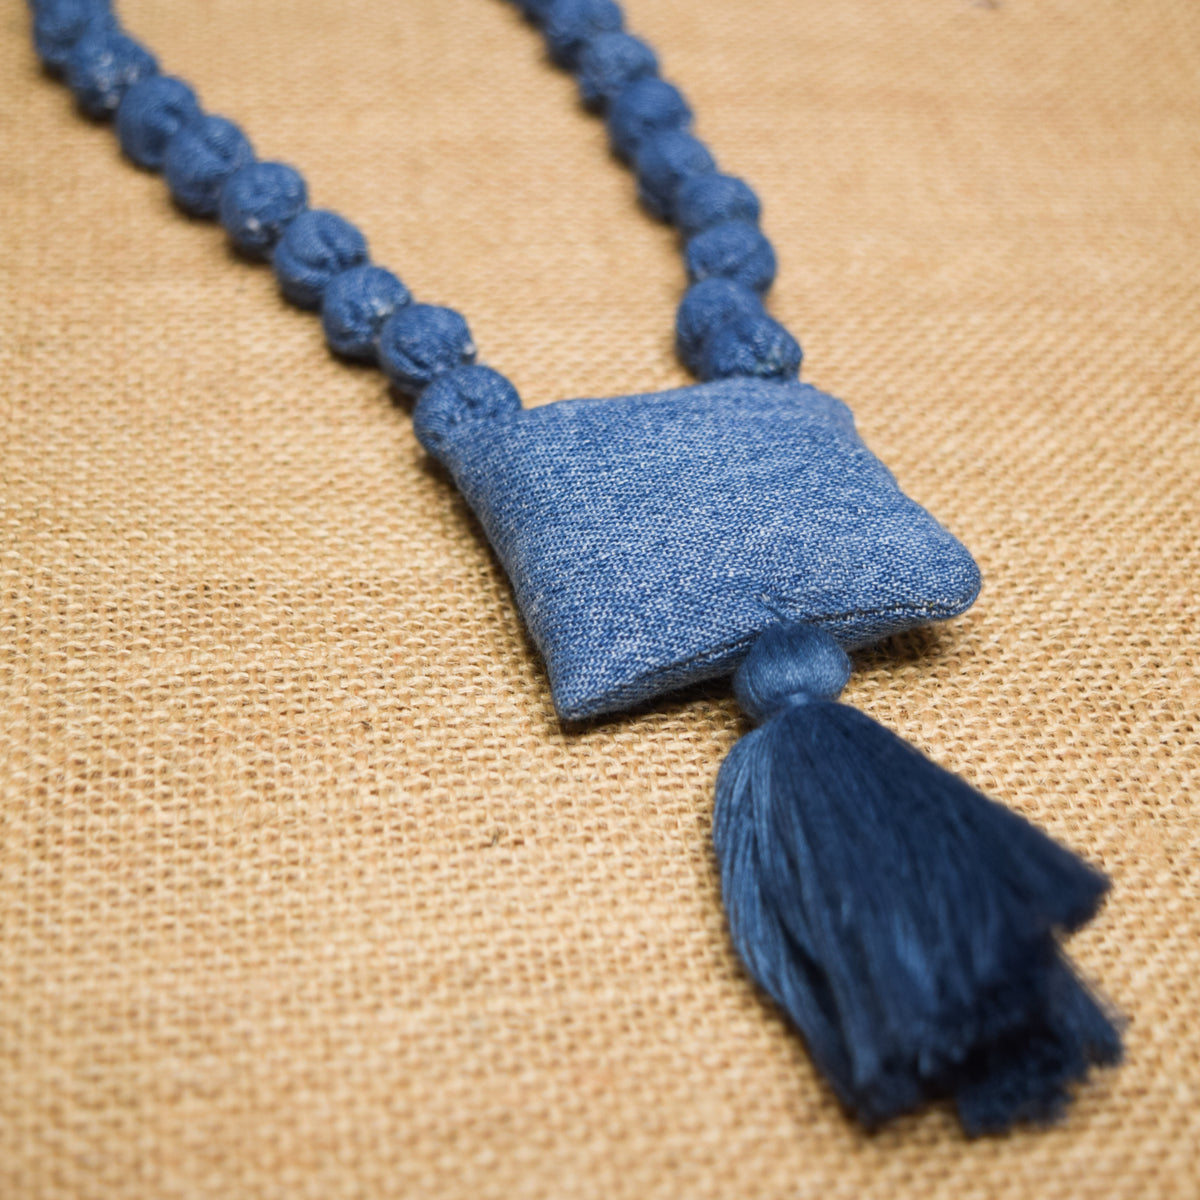 Upcycled Jeans Necklace